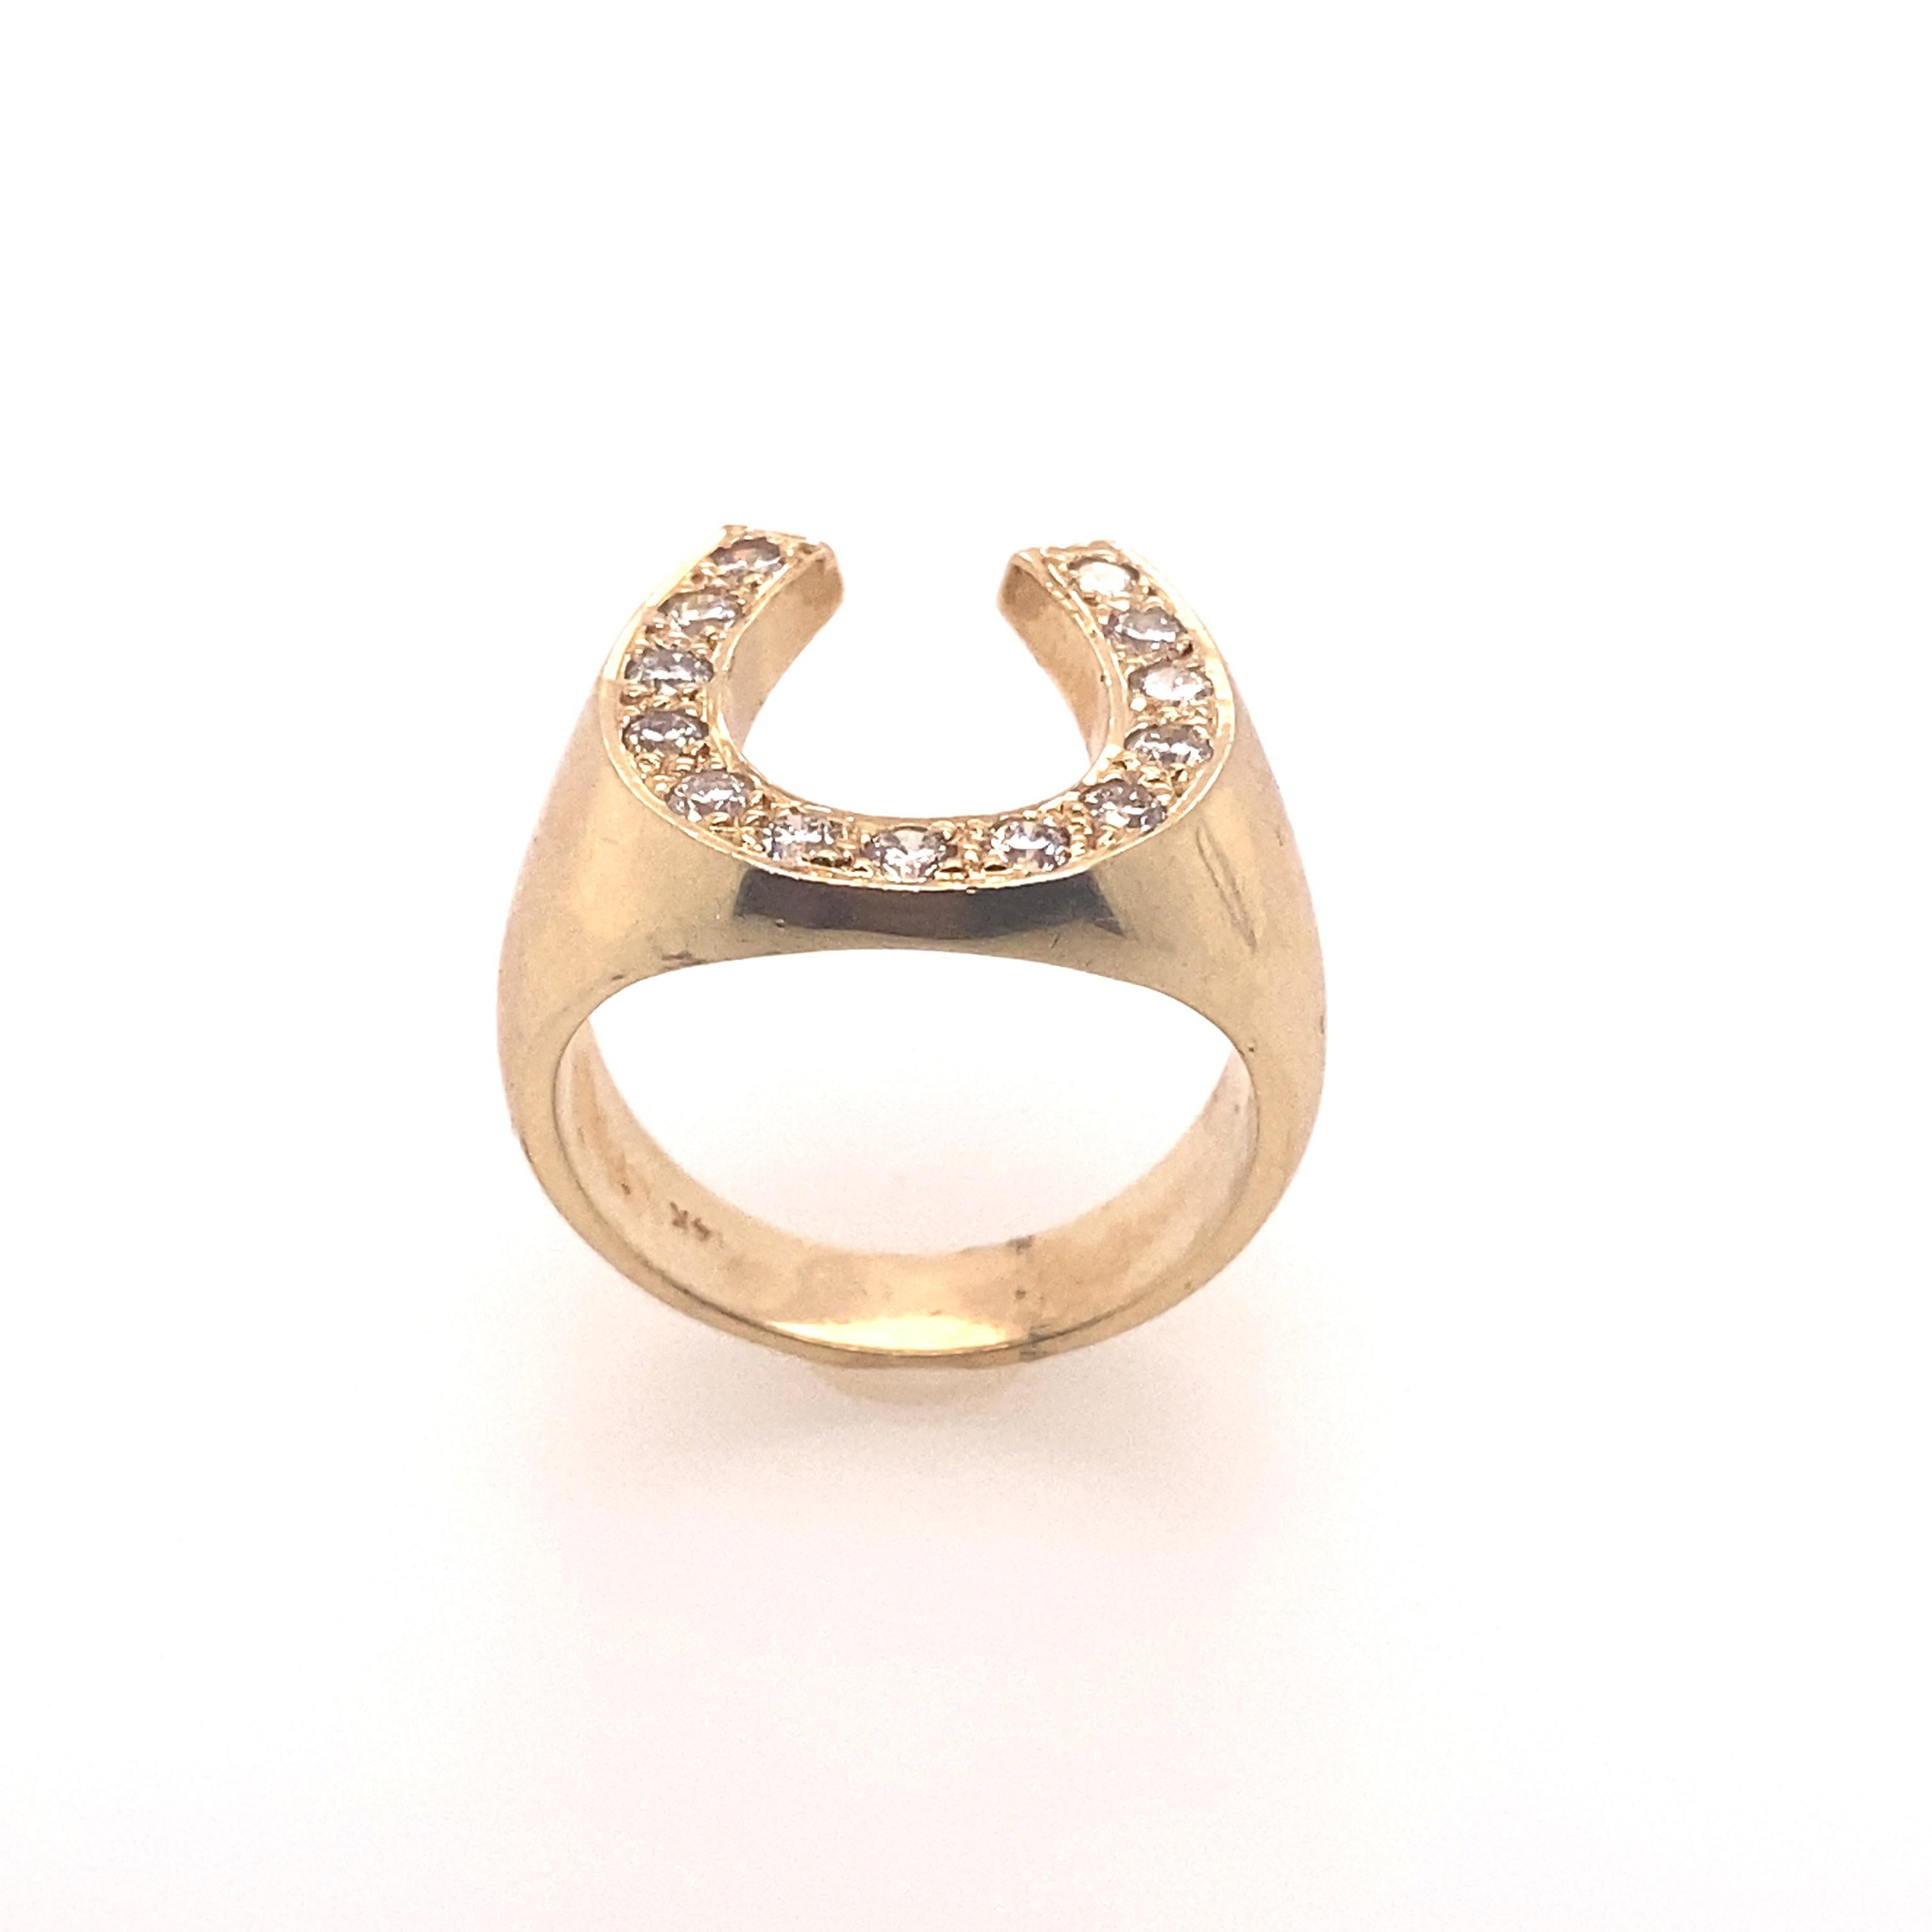 This stunning unisex Dome ring is crafted U symbol in 14 karat yellow gold.  The ring design is unique and 13 brilliant round diamonds are set in the U symbol. This ring features the bold and powerful statement. 

Diamonds Weight: 0.75